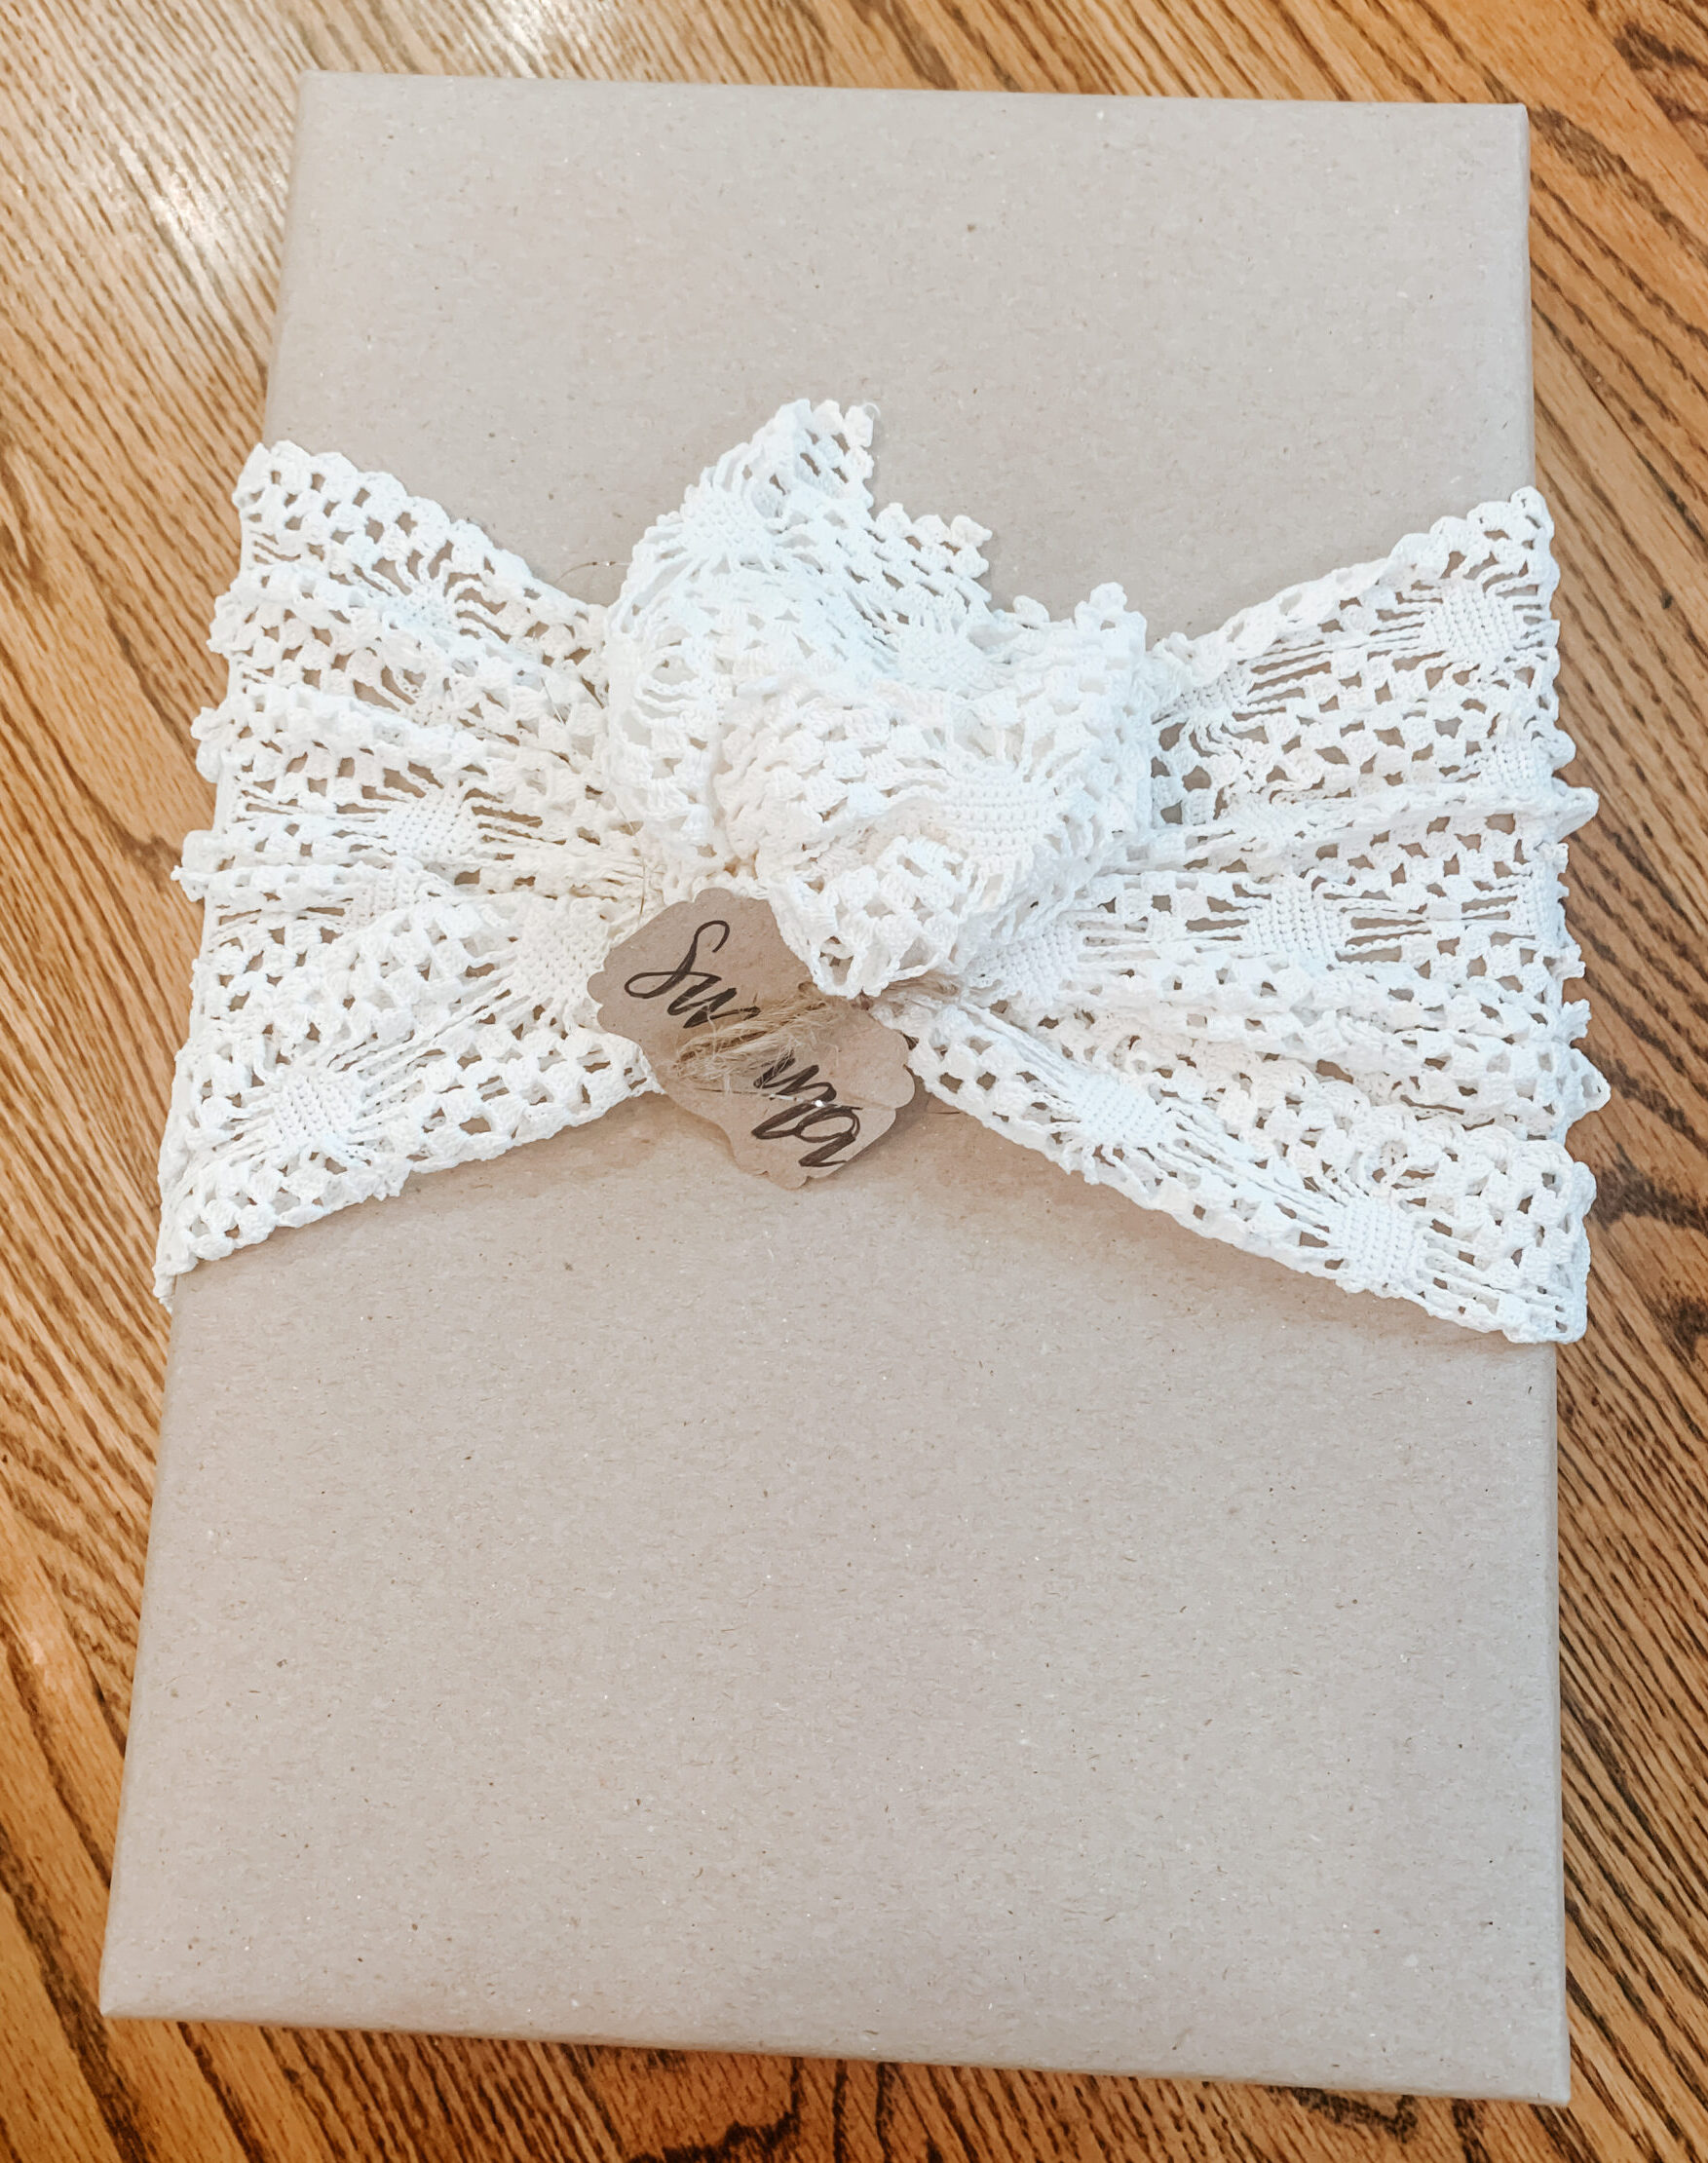 Doily wrapped around a brown paper package